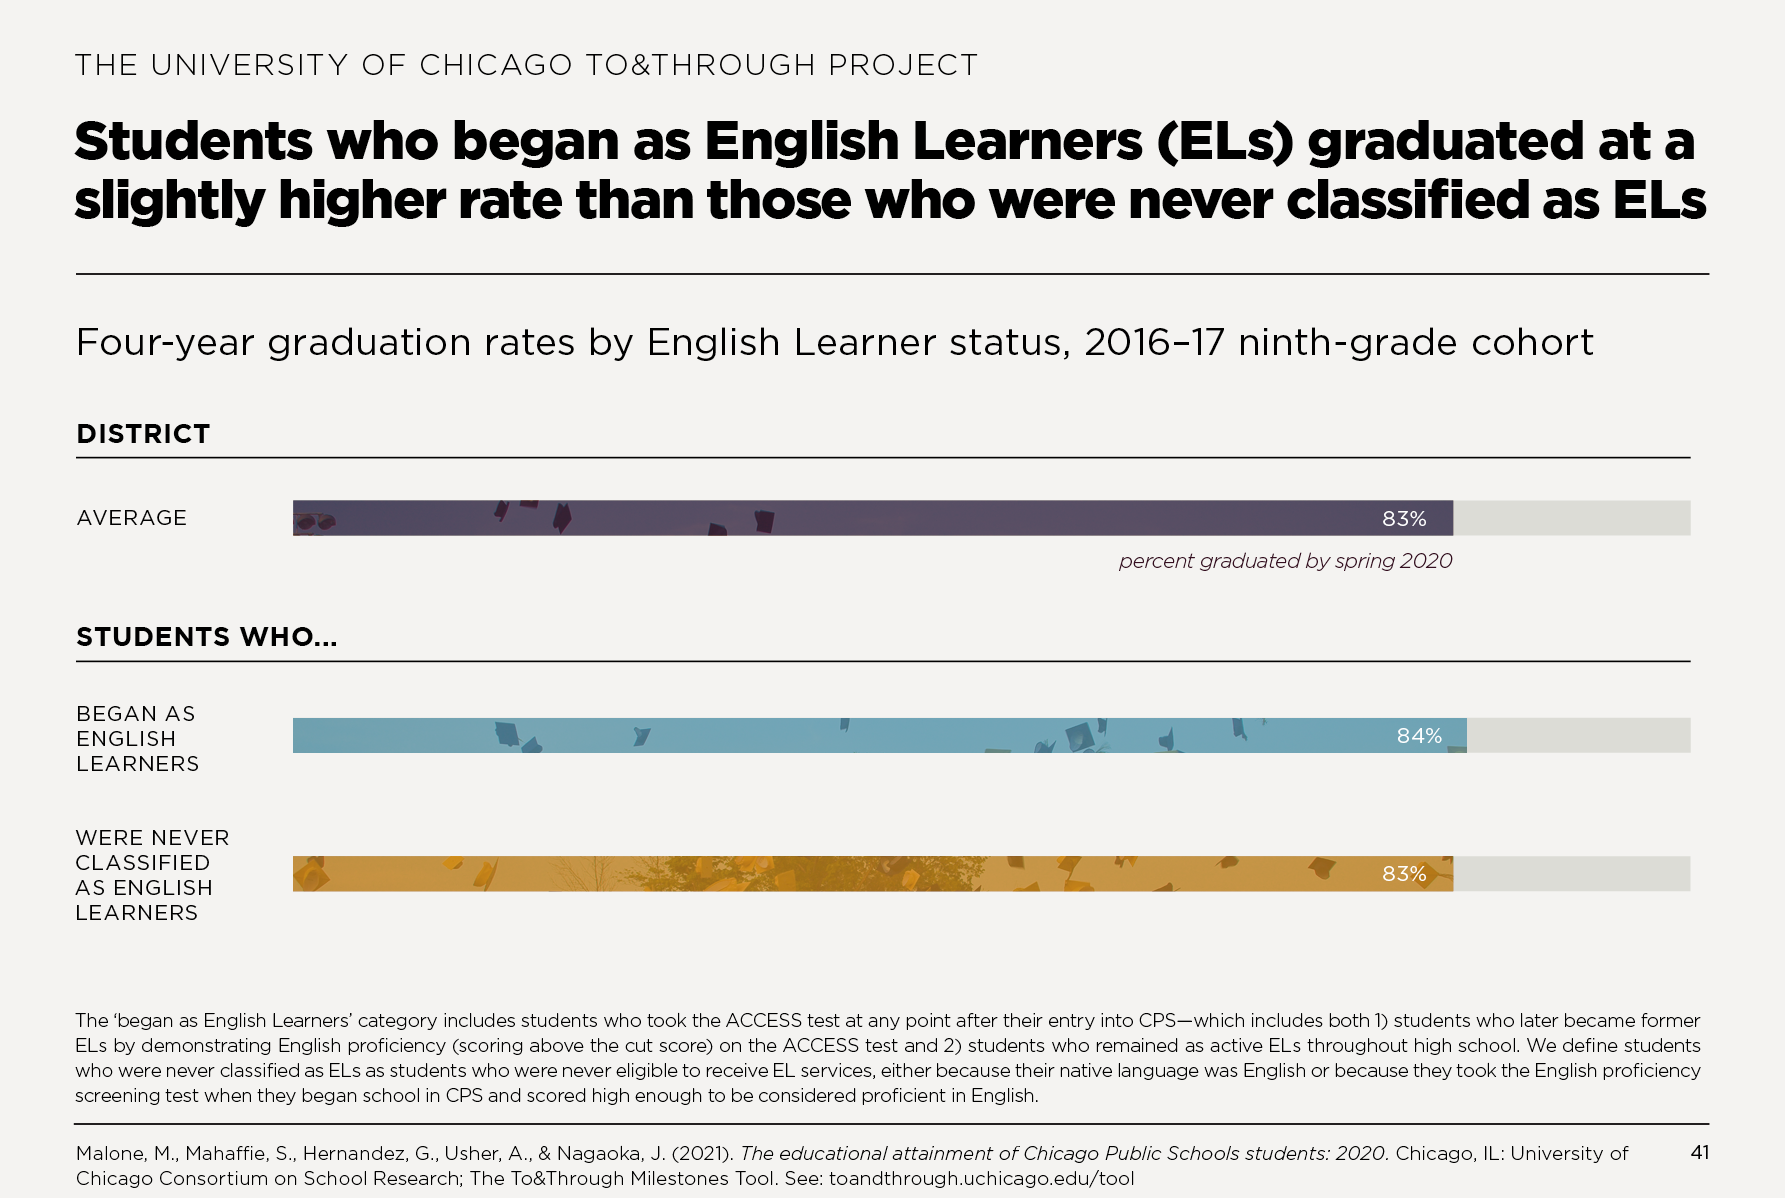 Students who began as English Learners (ELs) graduated at a slightly higher rate than those who were never classified as ELs